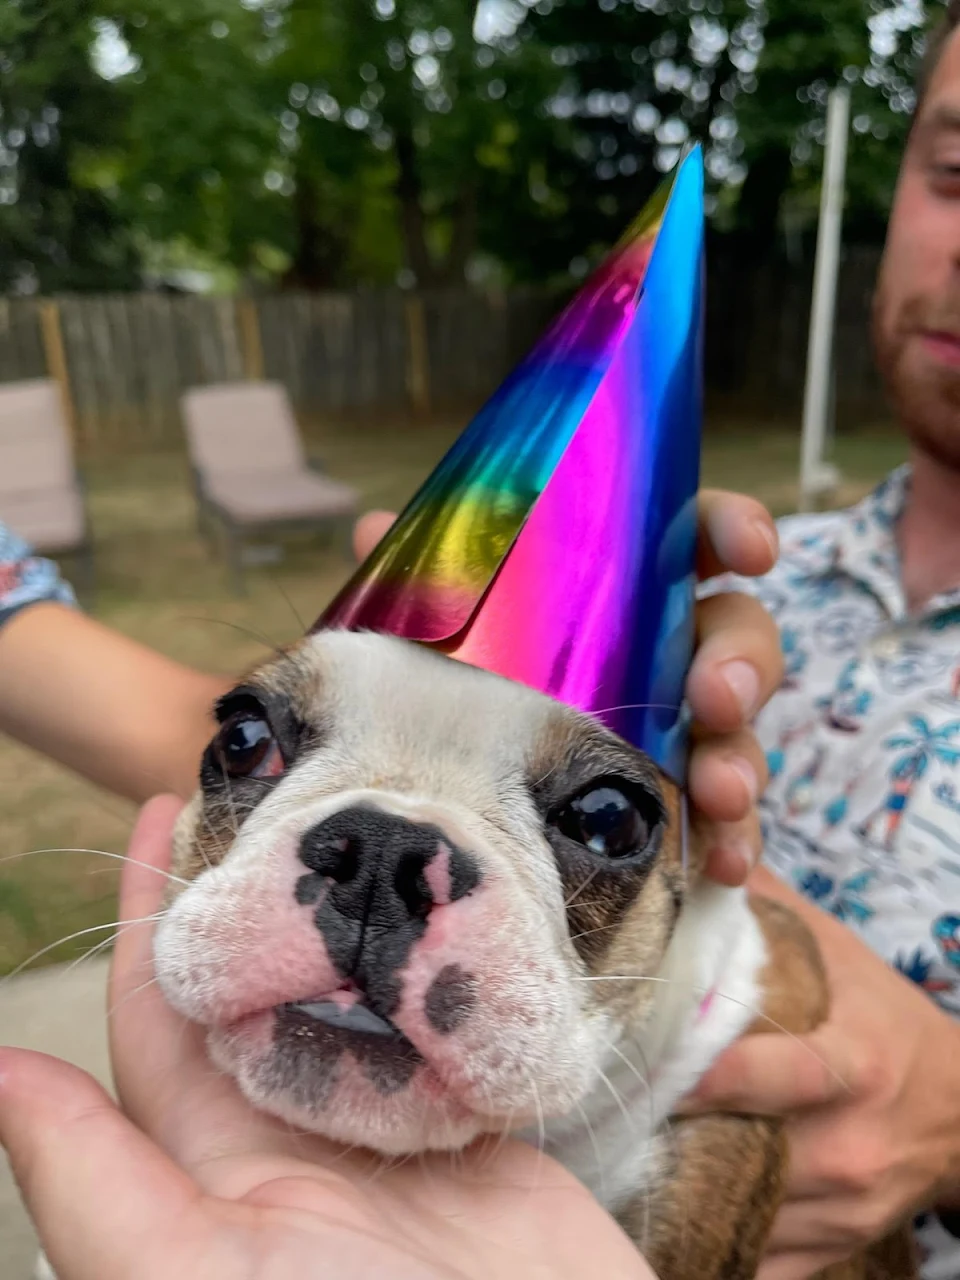 Poppy went to a birthday party